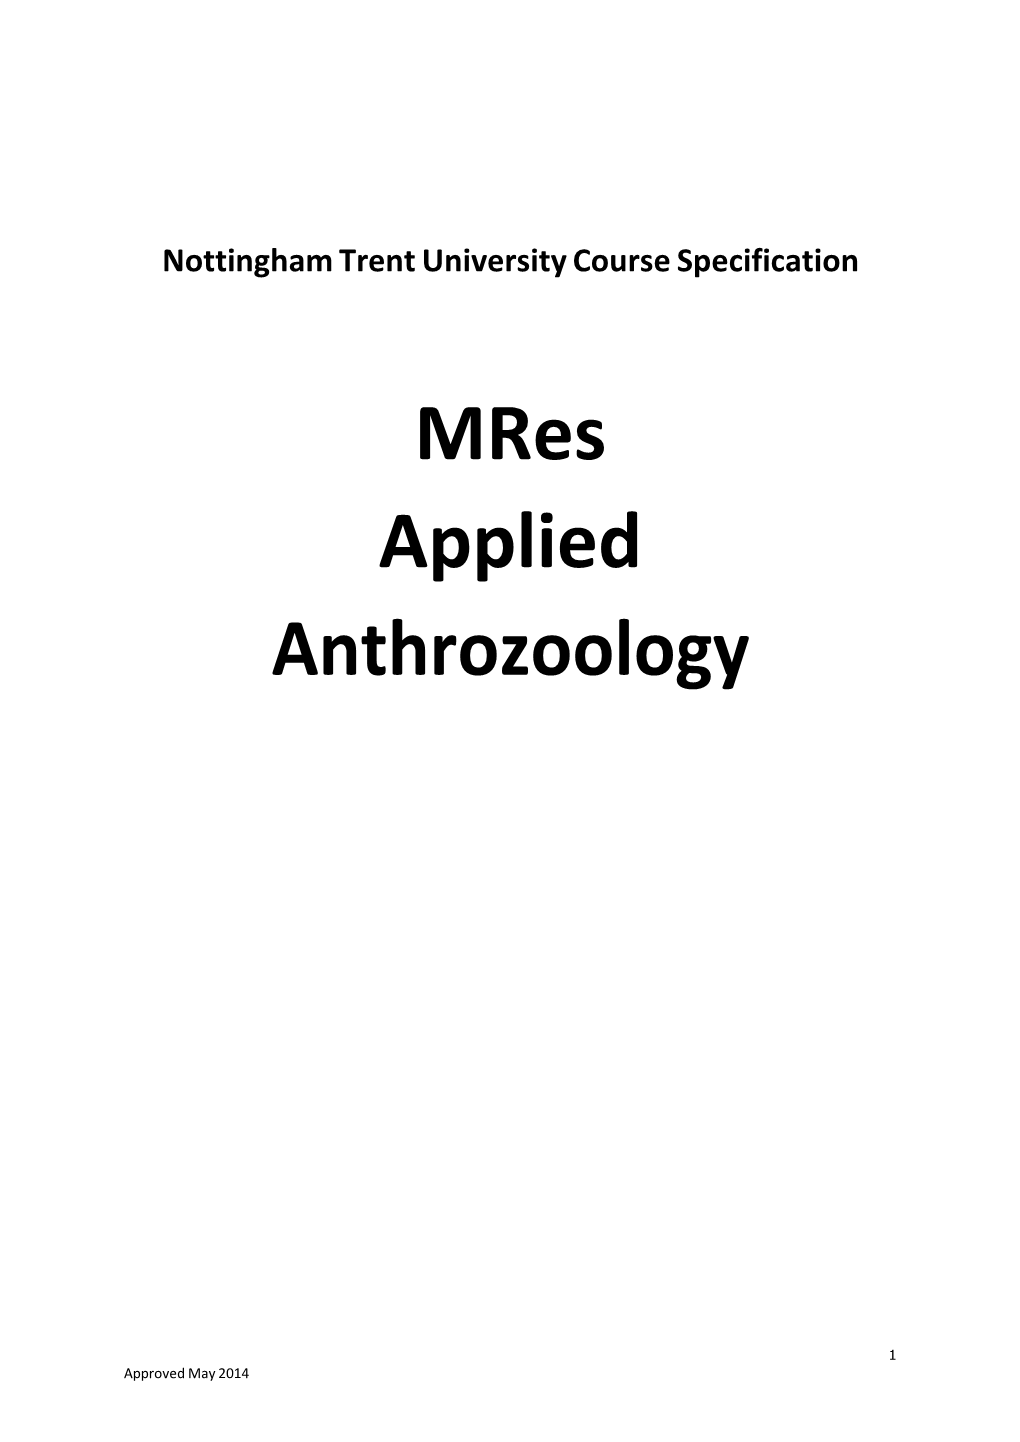 Mres Applied Anthrozoology